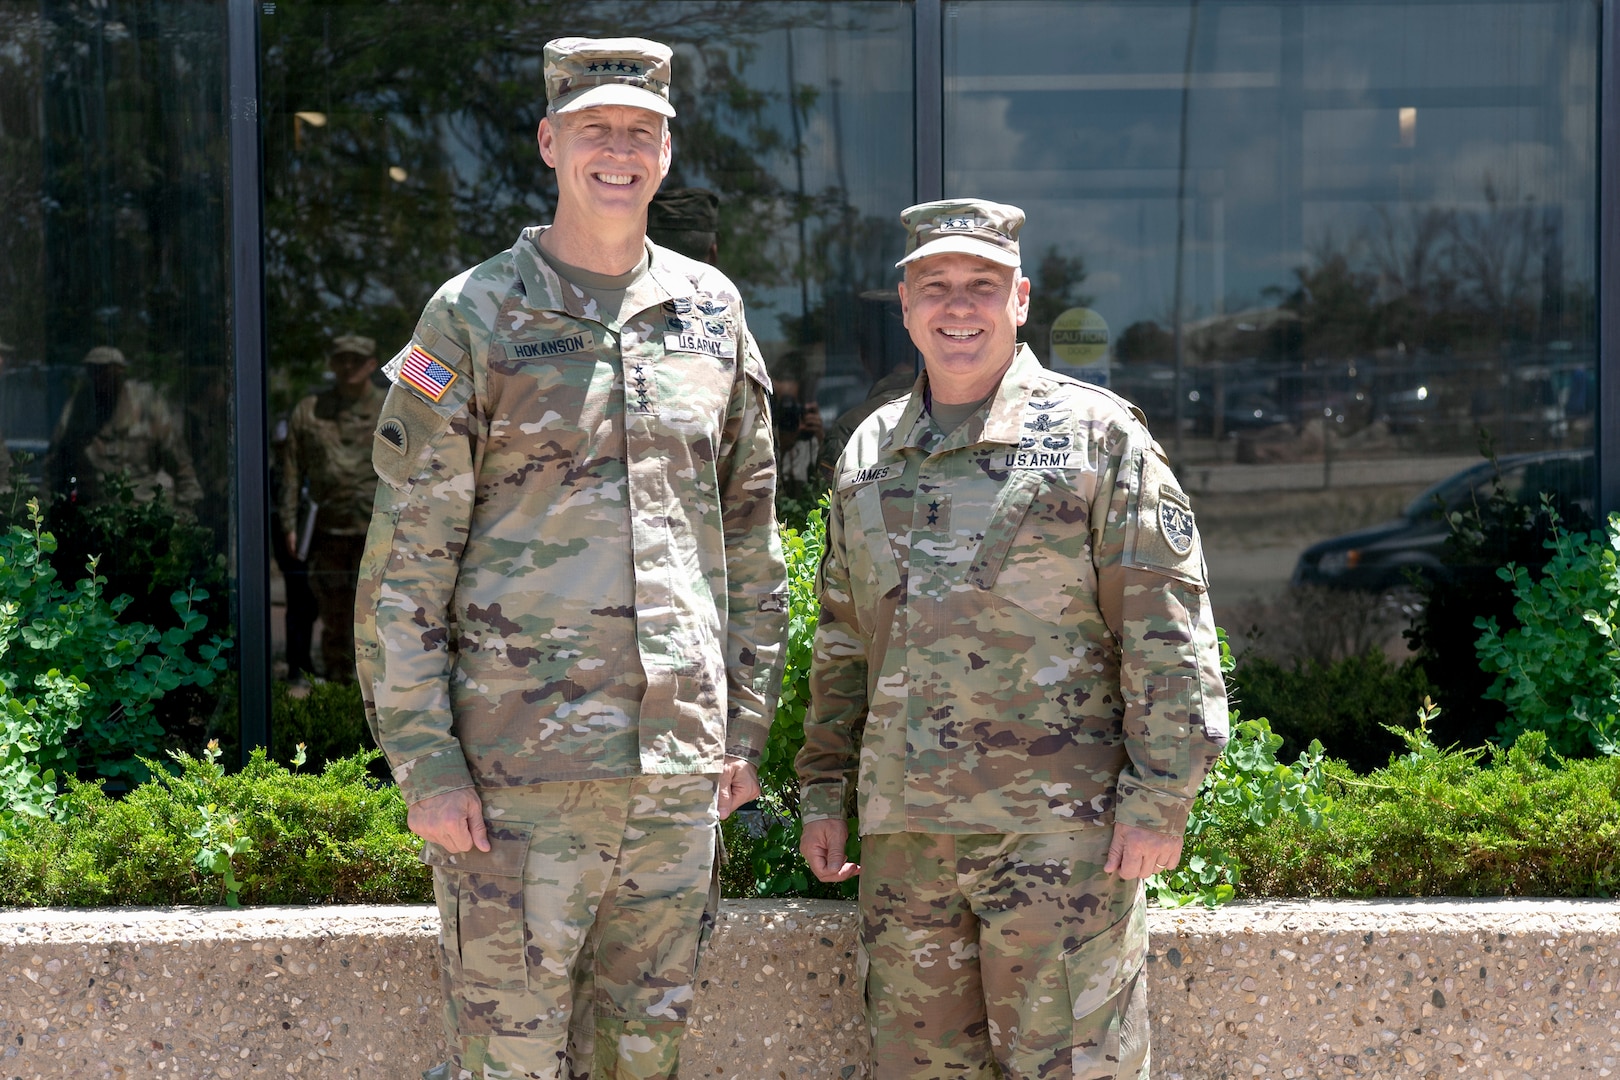 two military members posing for a photo smiling